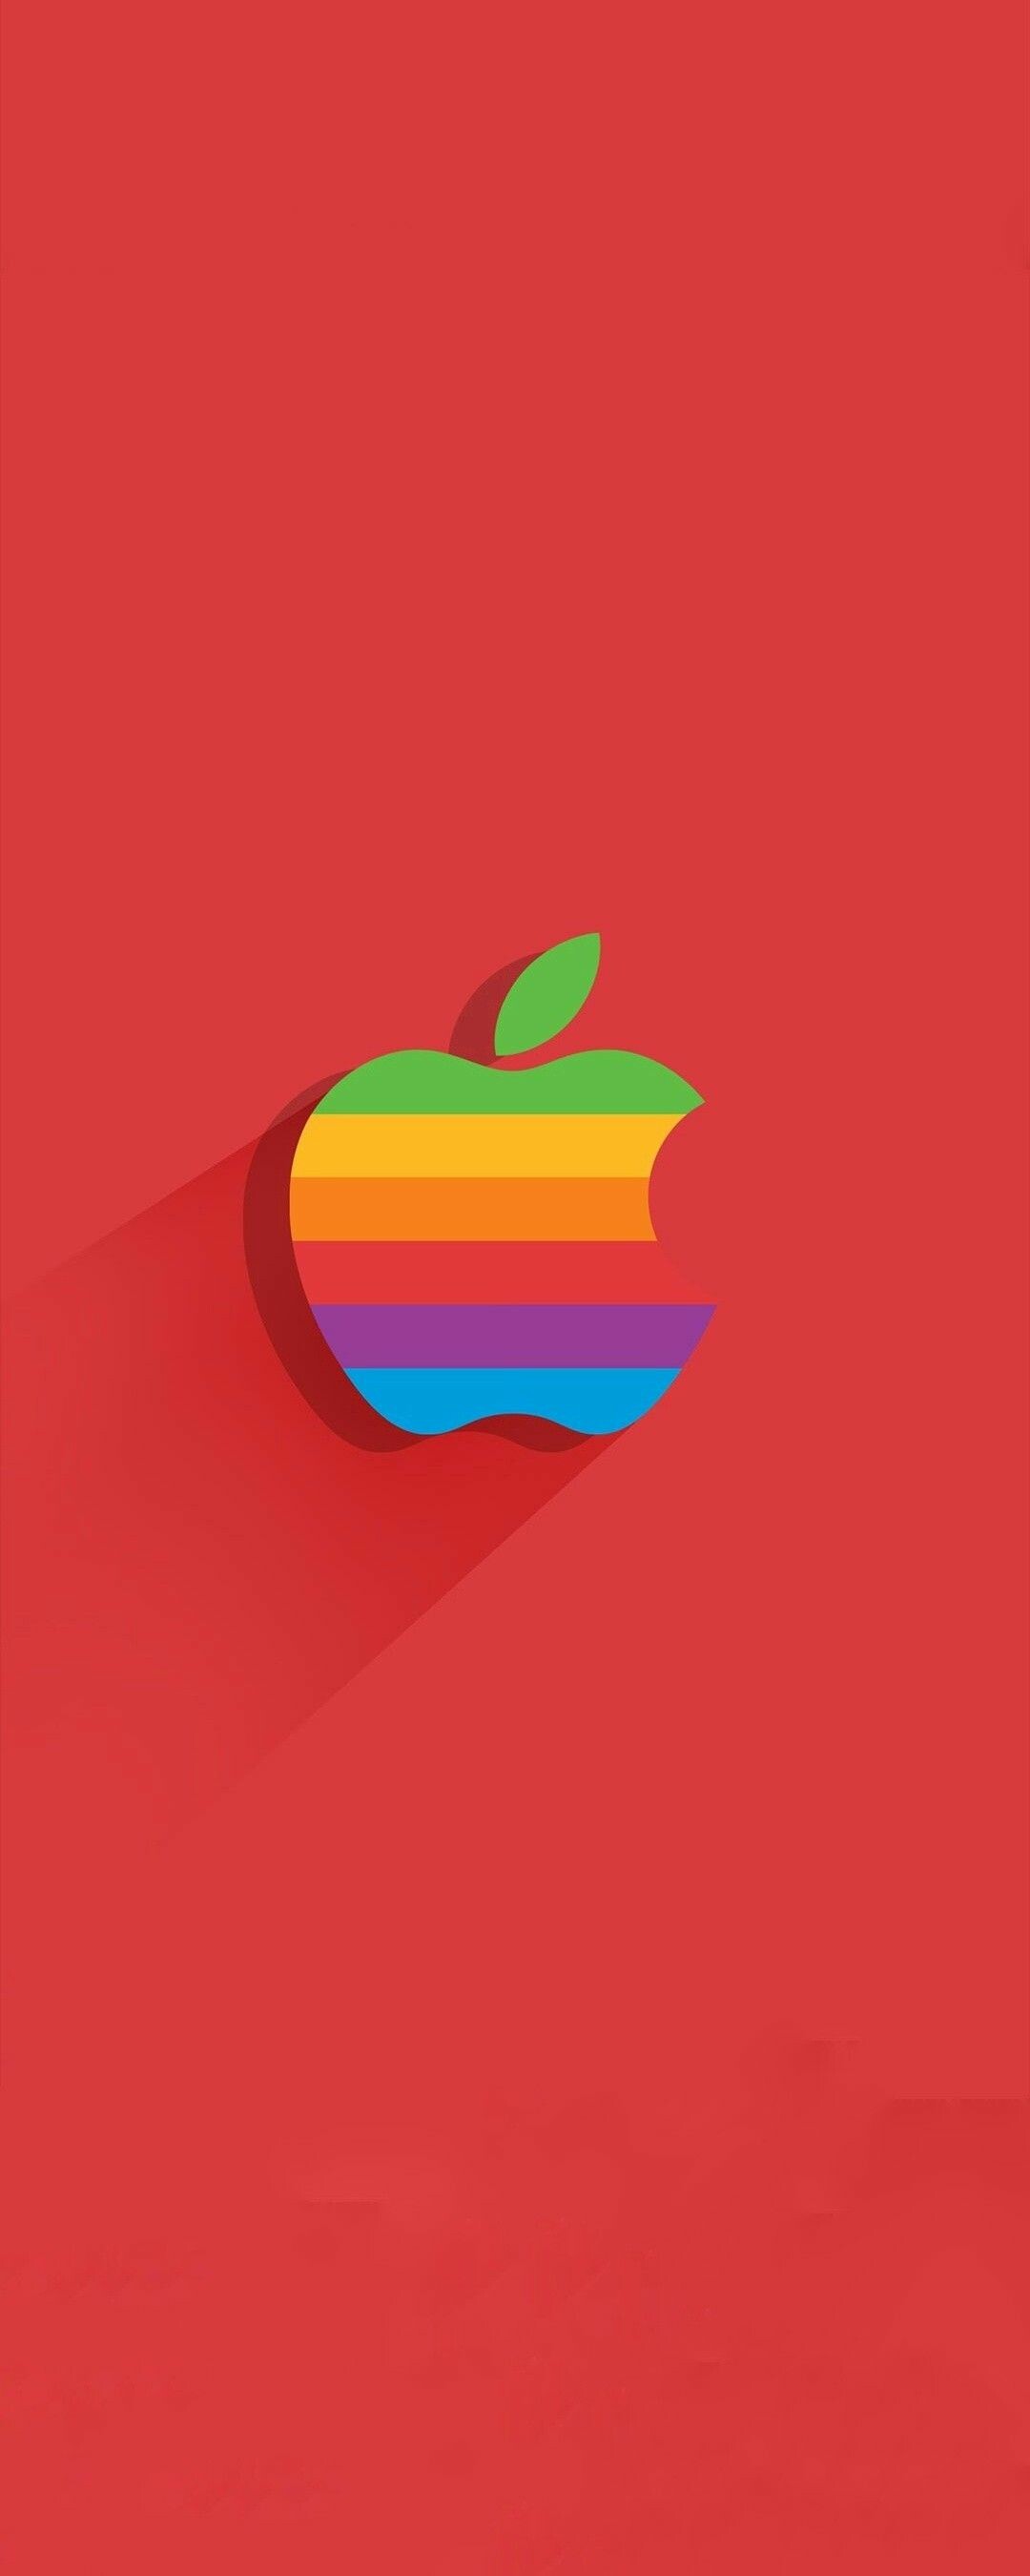 Apple Logo: Ranked as one of the world's most valuable brands, Rainbow logotype, Originated in 1976. 1080x2700 HD Wallpaper.